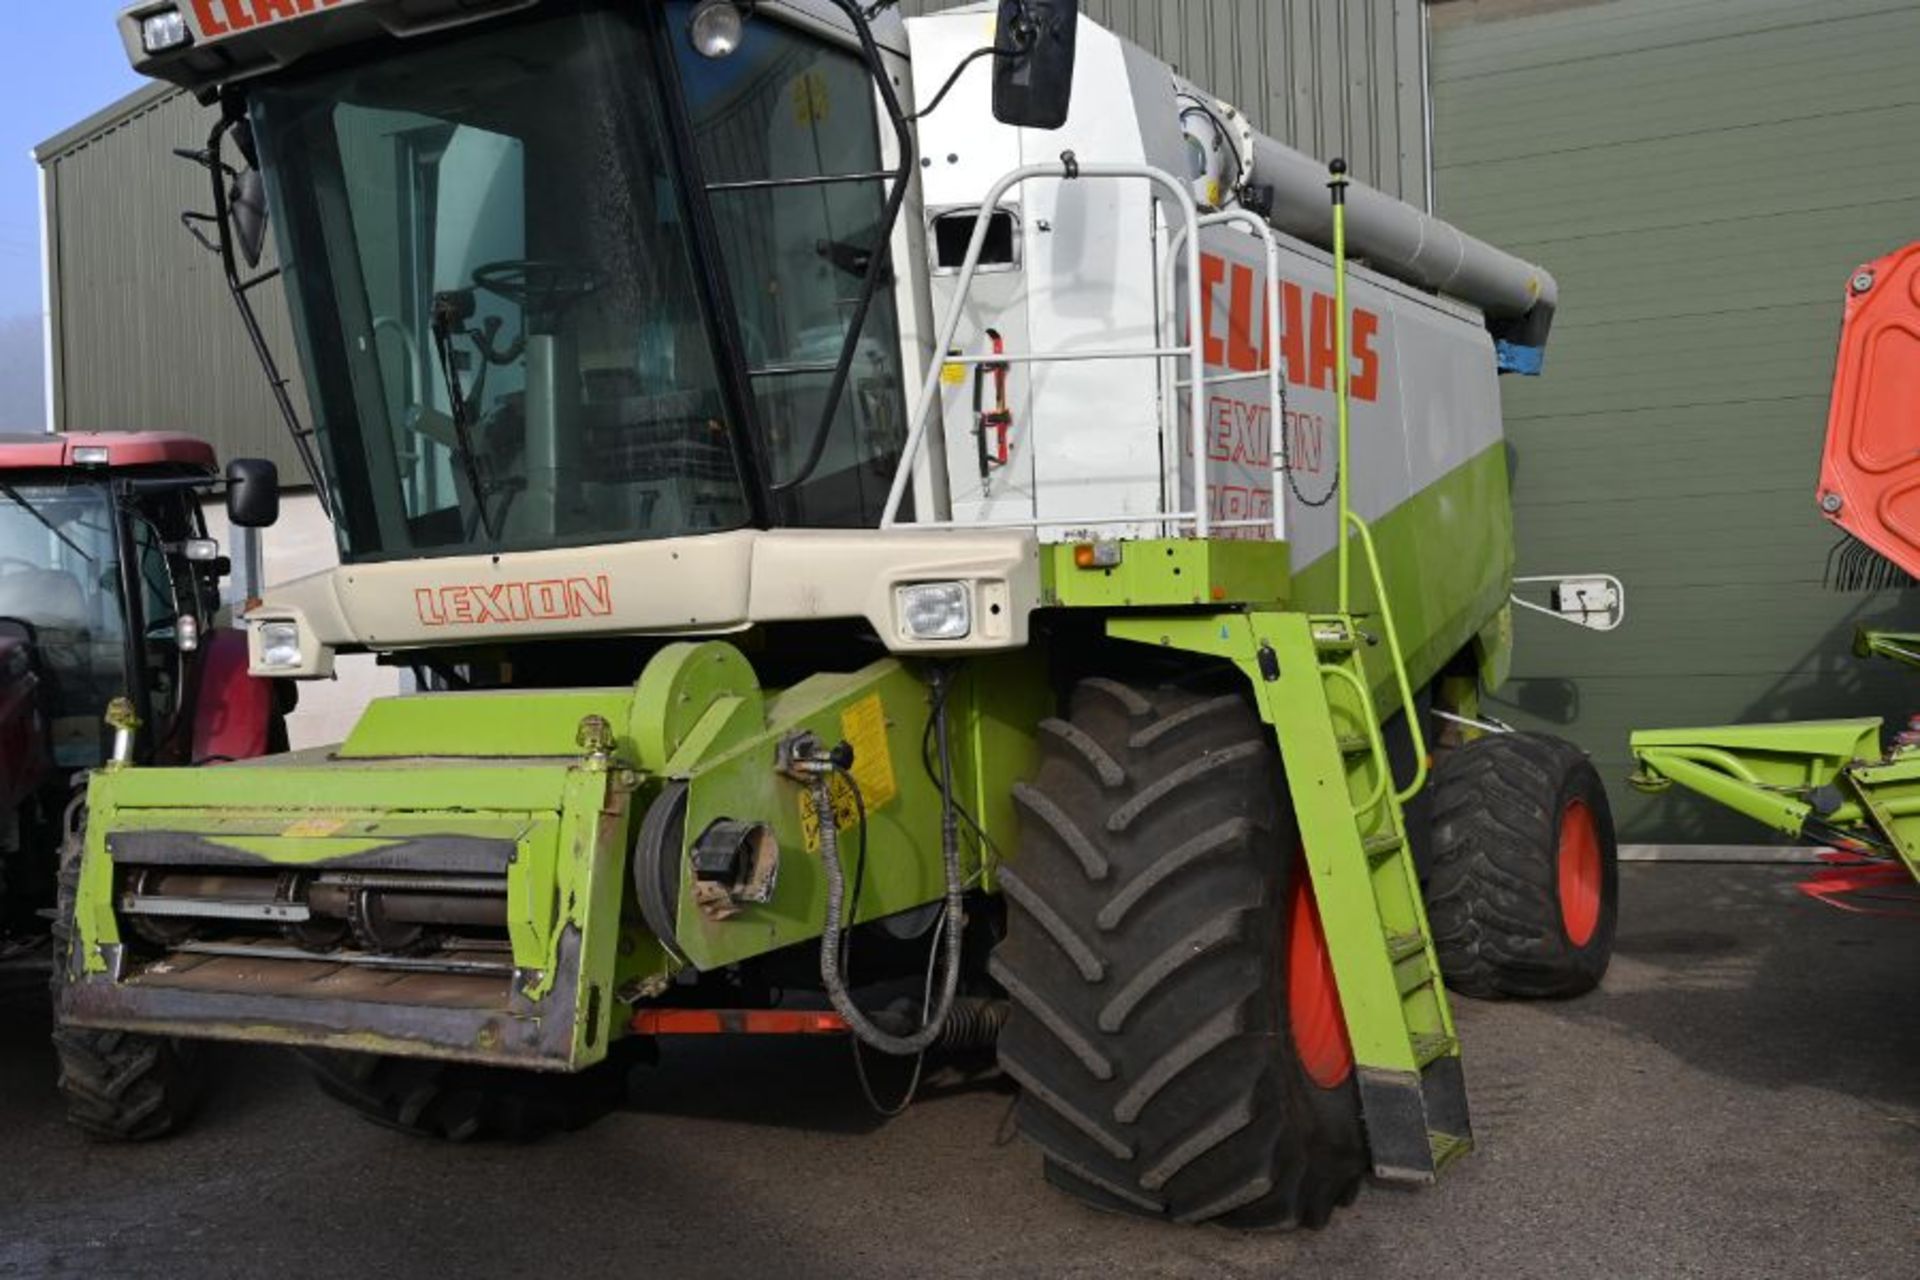 Claas Lexion 480 combine Y383 0DX / 3658 hours with a V750 auto header and header trailer - Bild 10 aus 27